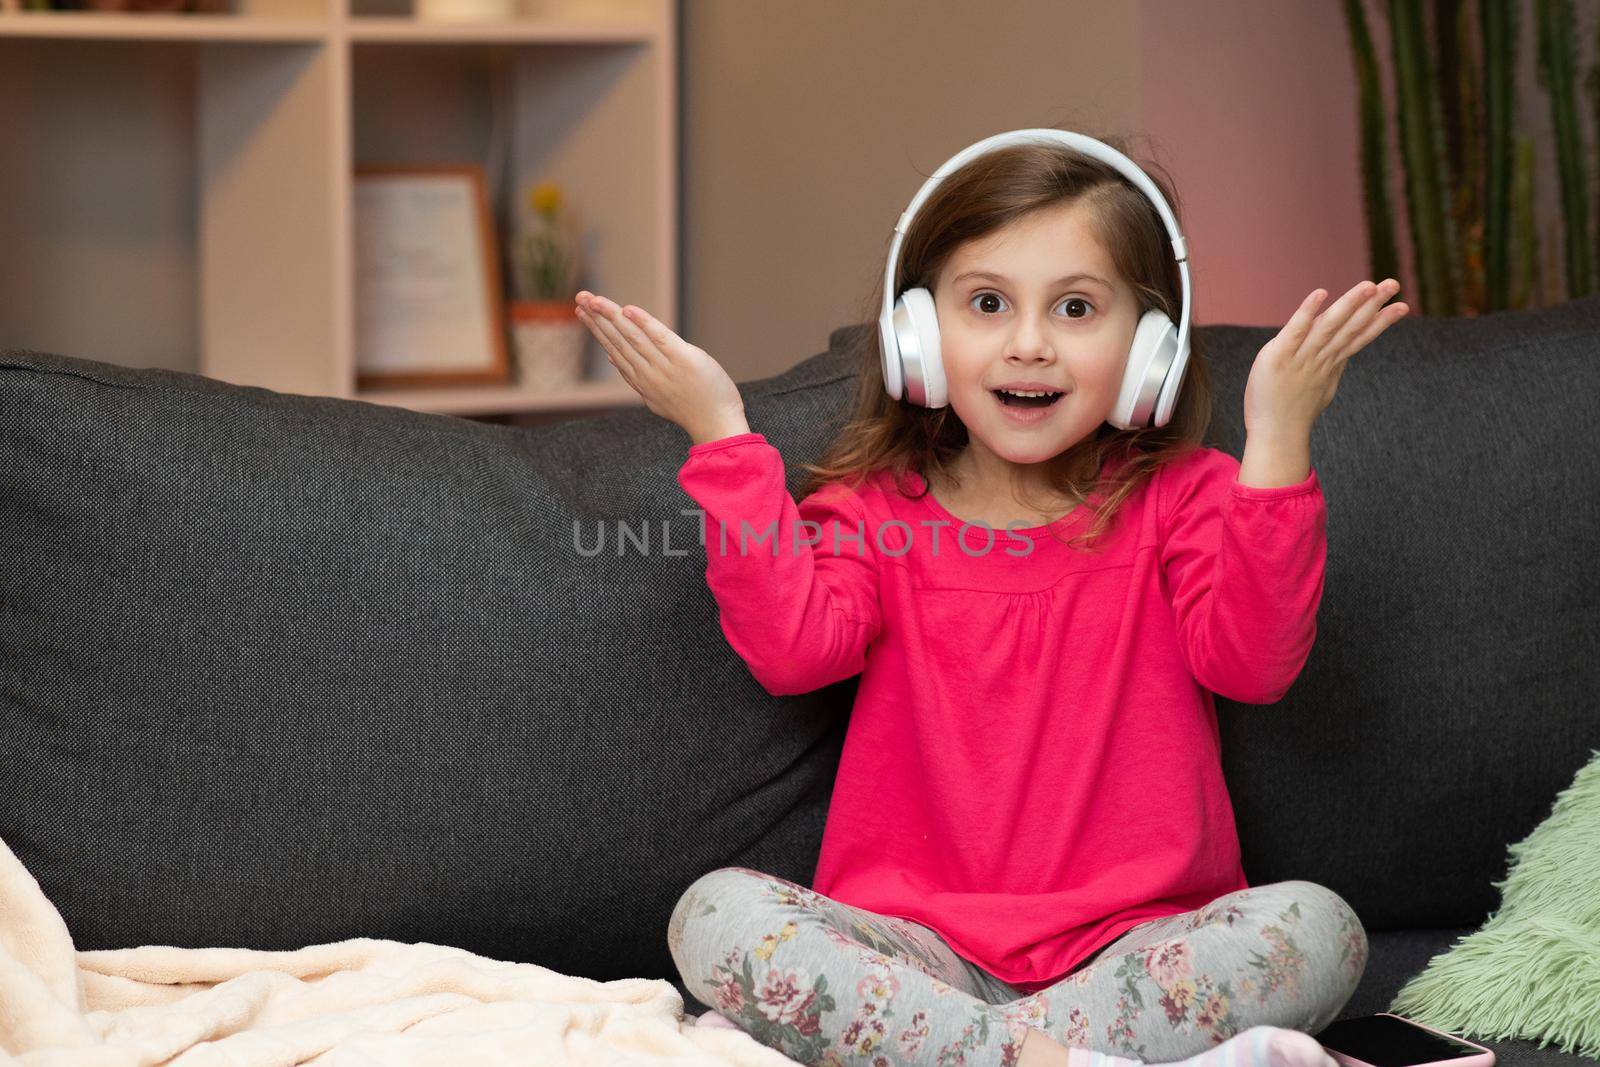 Little Girl Listens To Music On Wireless Headphones. Funny Little Girl Dancing, Singing And Moving To Rhythm. Kid Wearing Headphones. by uflypro